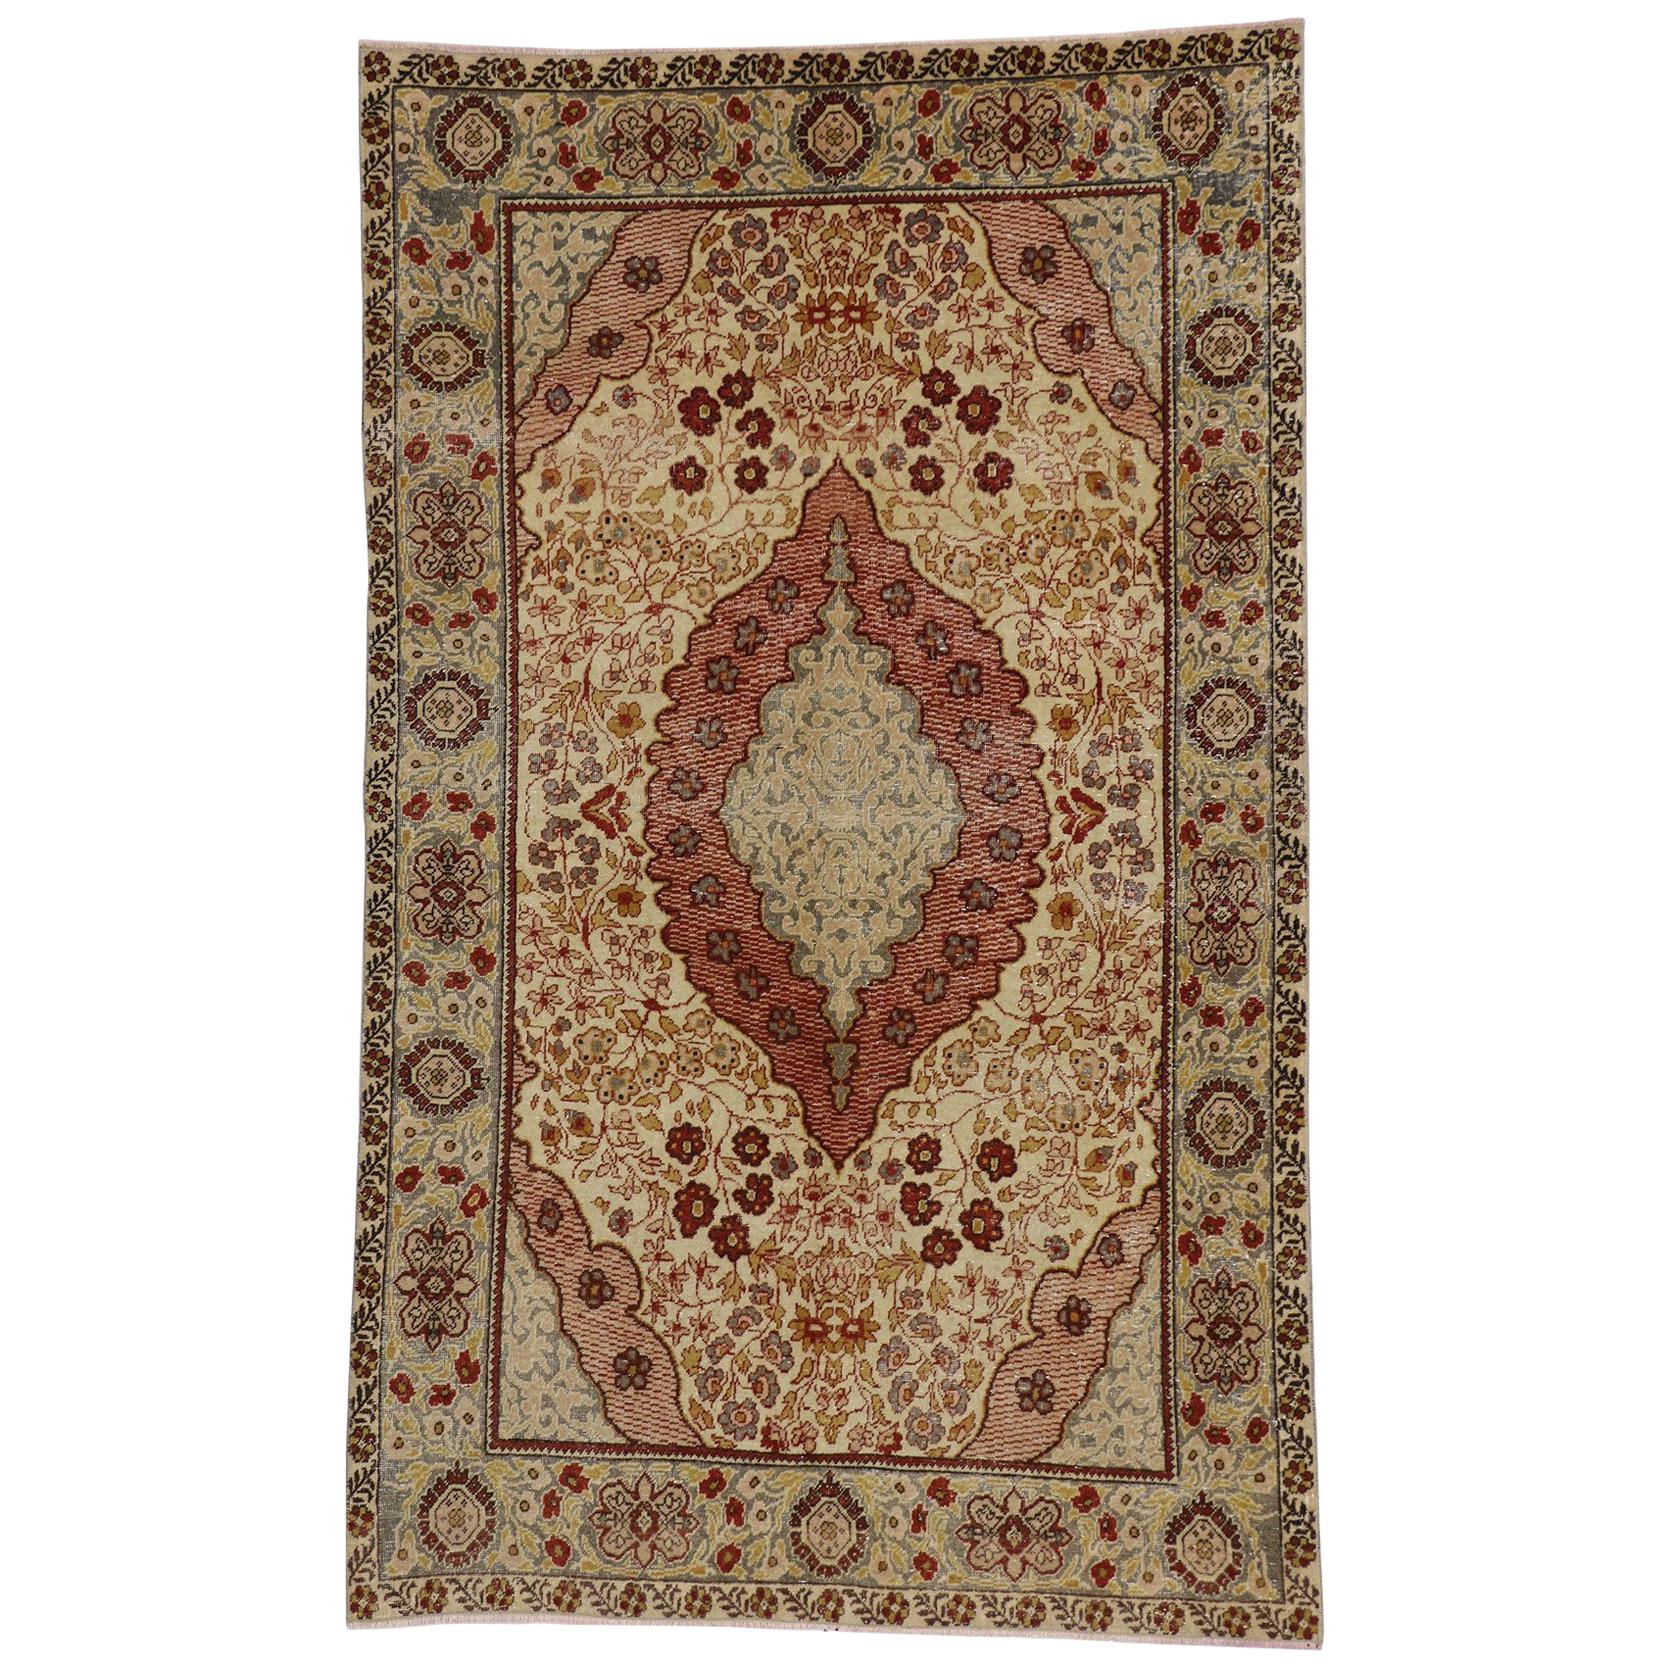 Distressed Vintage Turkish Oushak Rug with Rustic Cottage Arts & Crafts Style